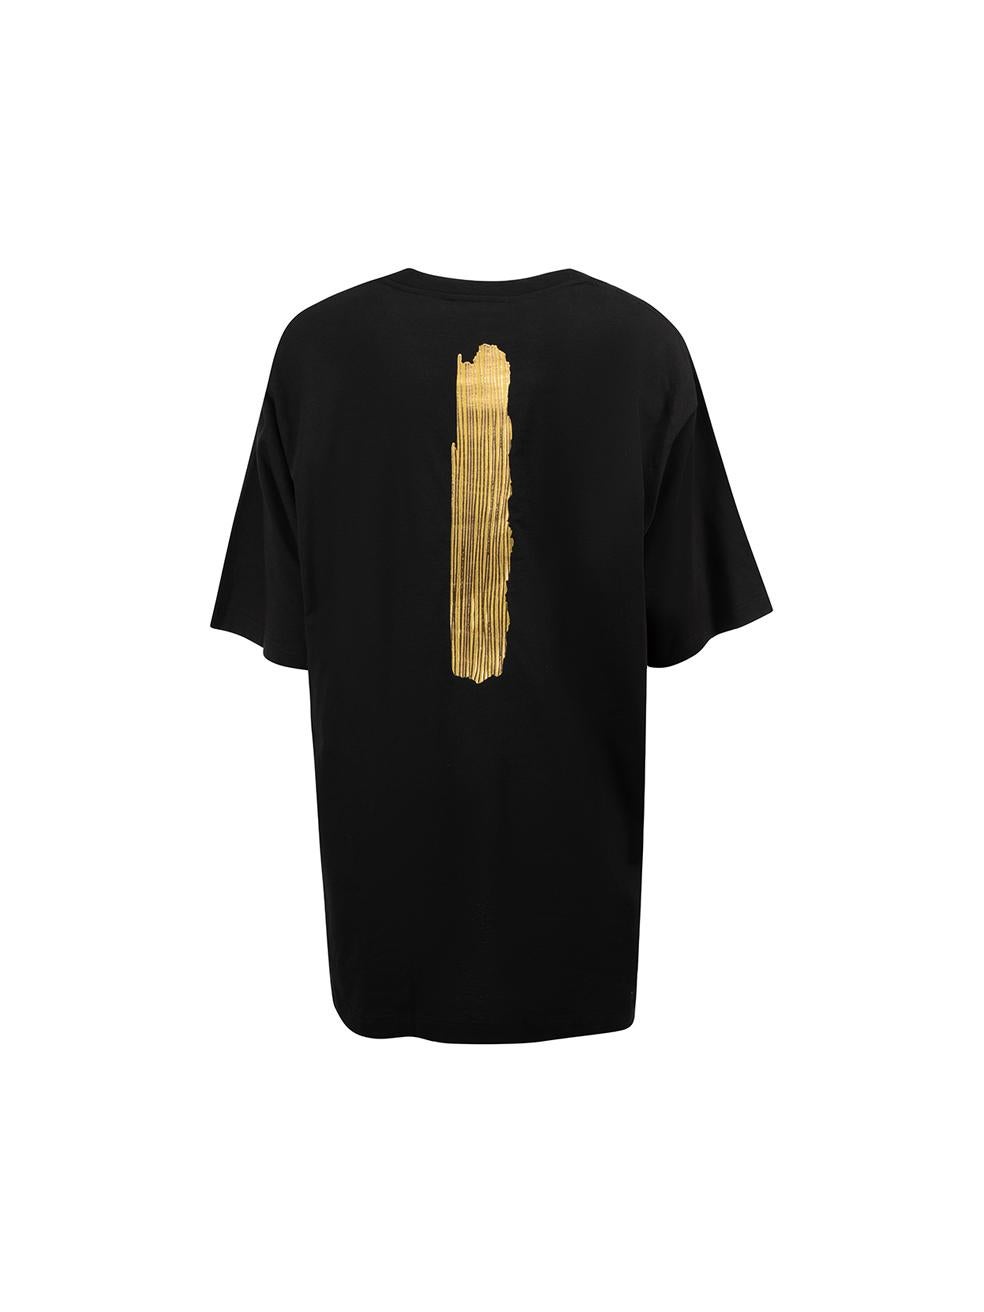 Dolce & Gabbana Black Cotton Gold Realtà Parallela Print T-Shirt Size S In New Condition In London, GB